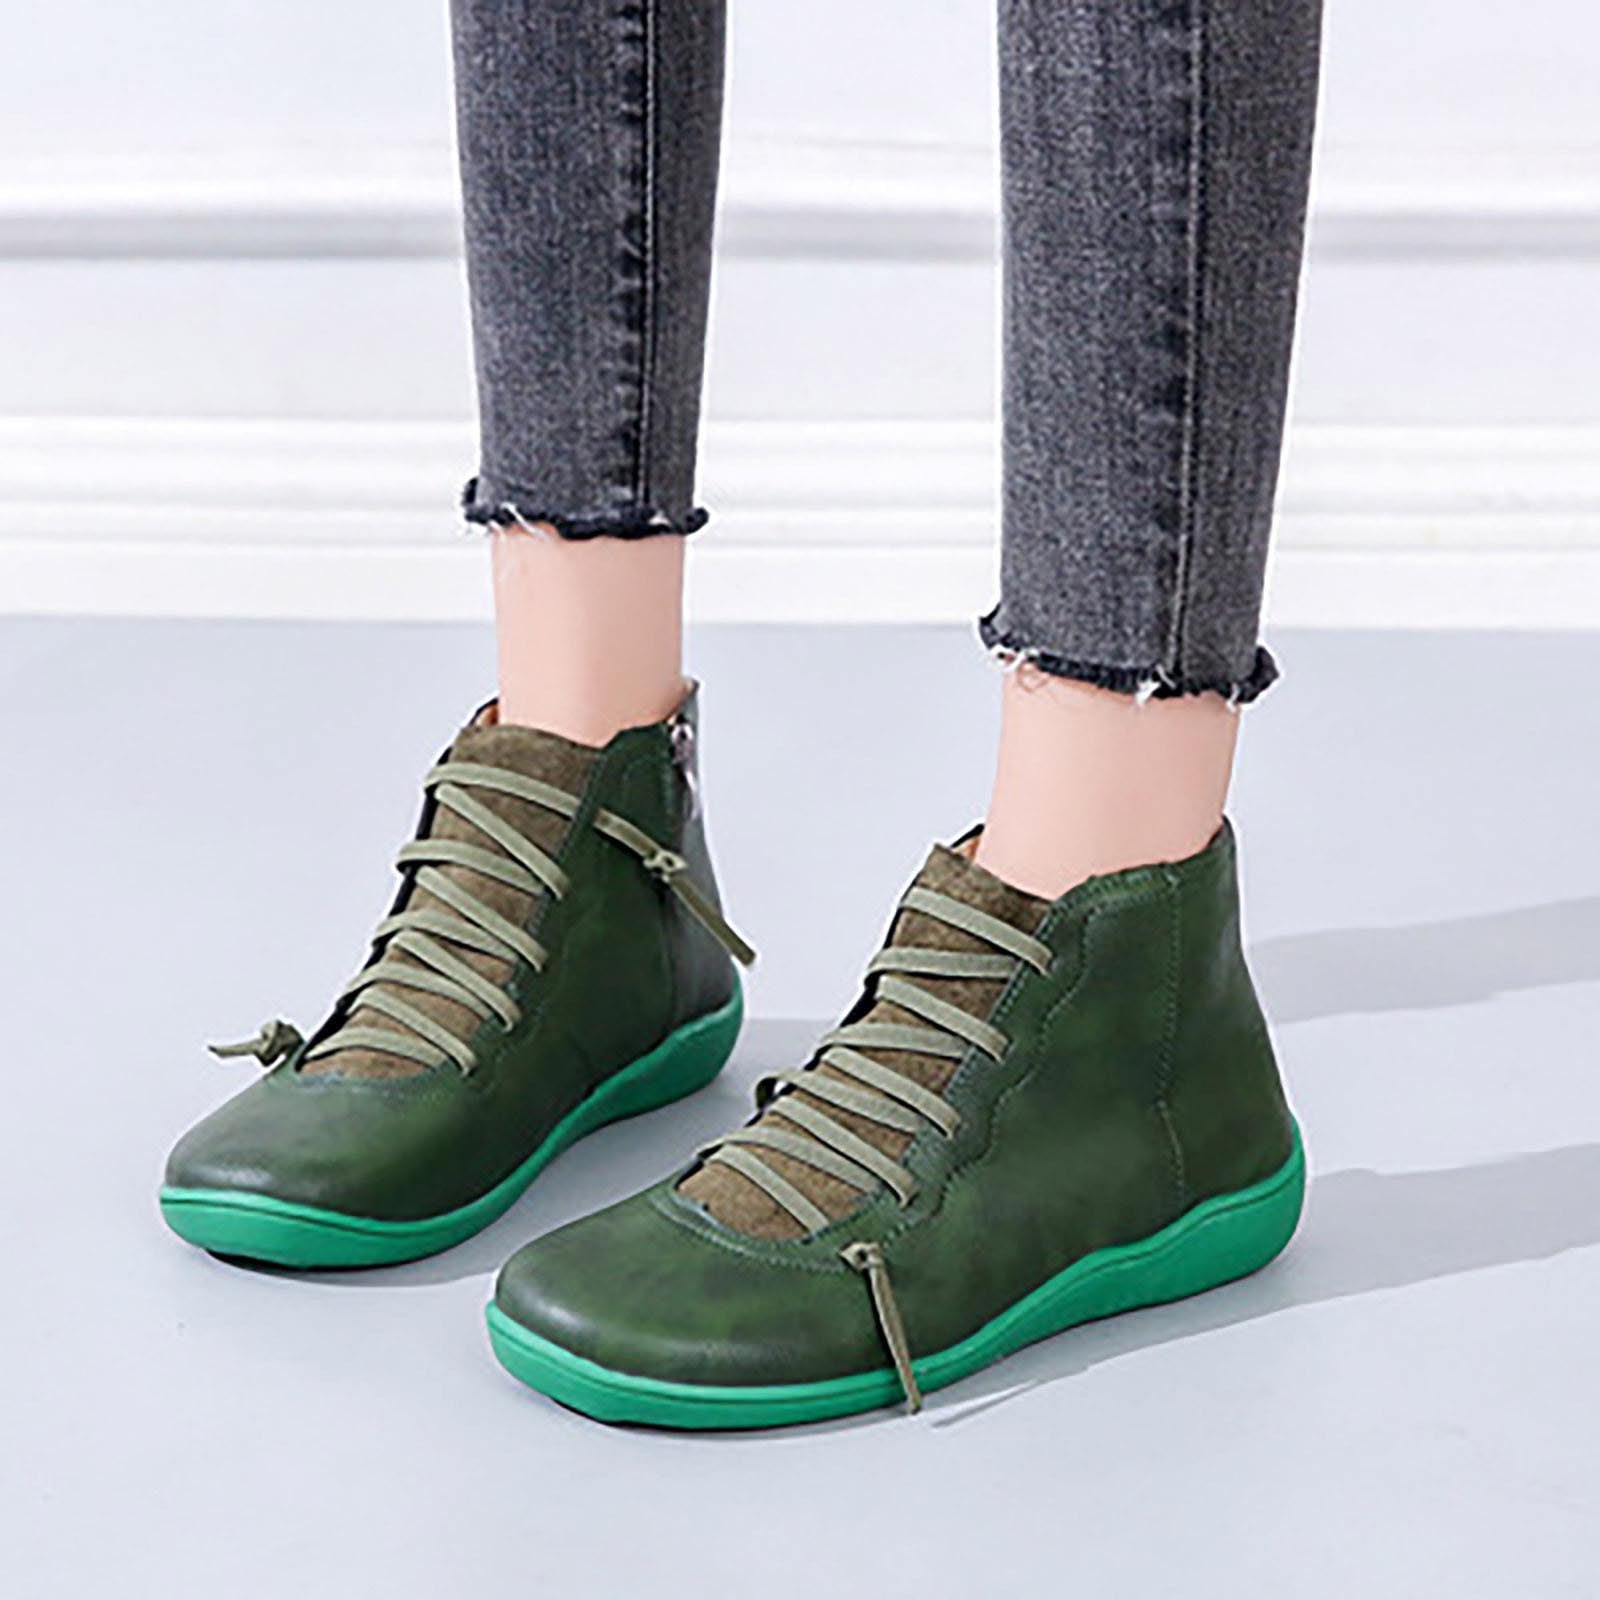 glide Intim Genoplive Zunfeo Women Chelsea Boots- Chelsea Boots Fashion Casual Boots Solid New  Boots Christmas Gifts Clearance Green 5.5 - Walmart.com